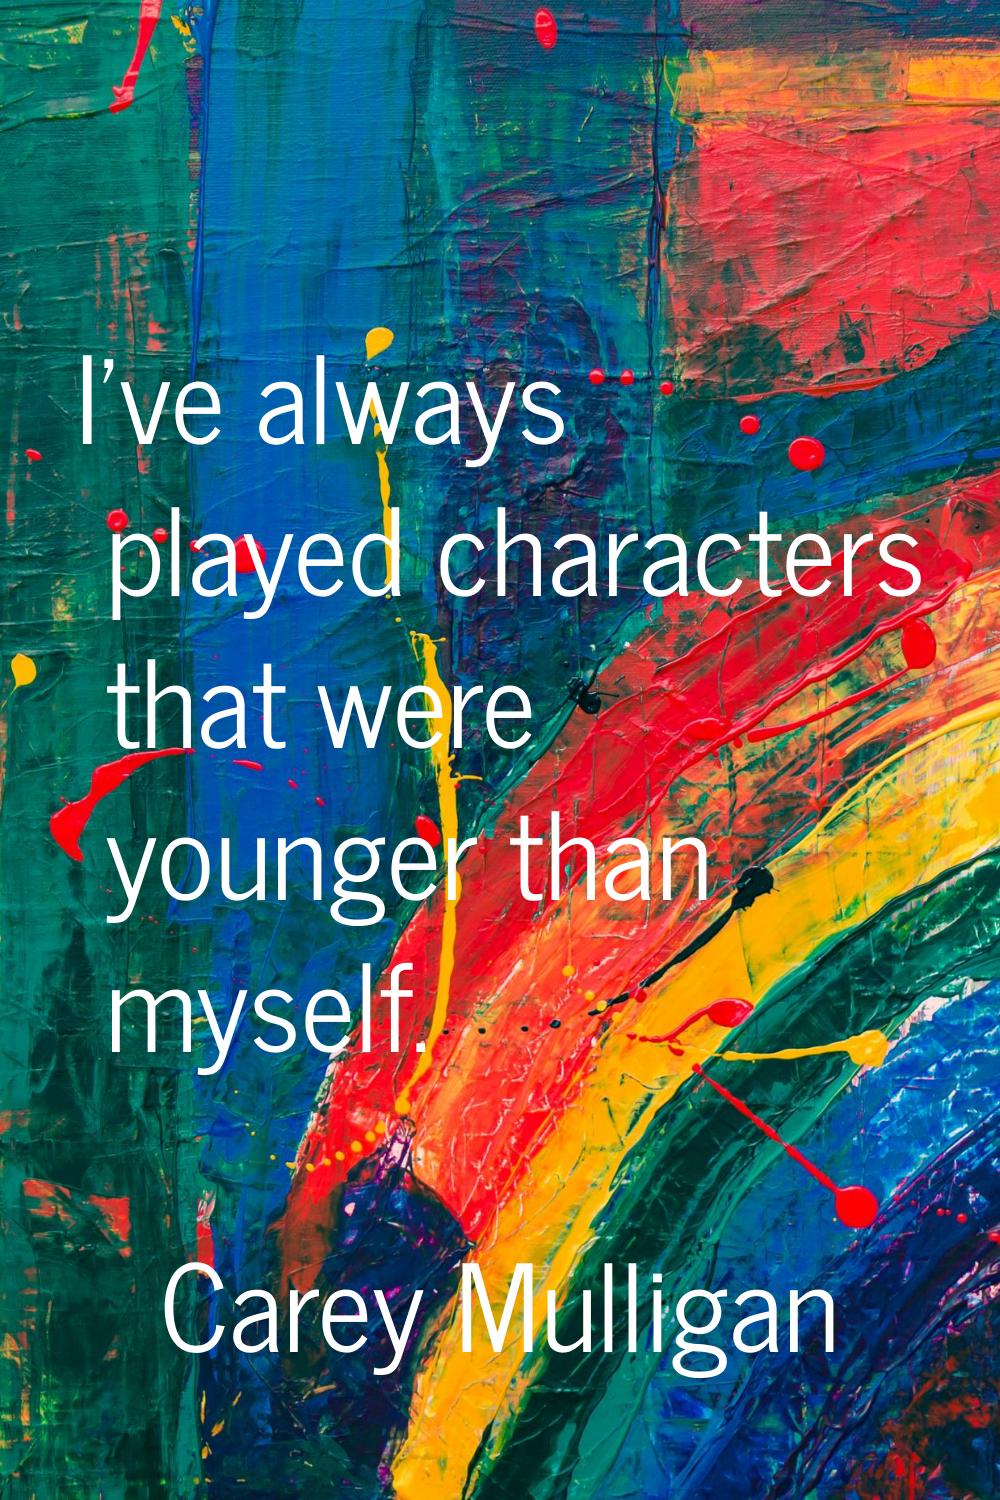 I've always played characters that were younger than myself.